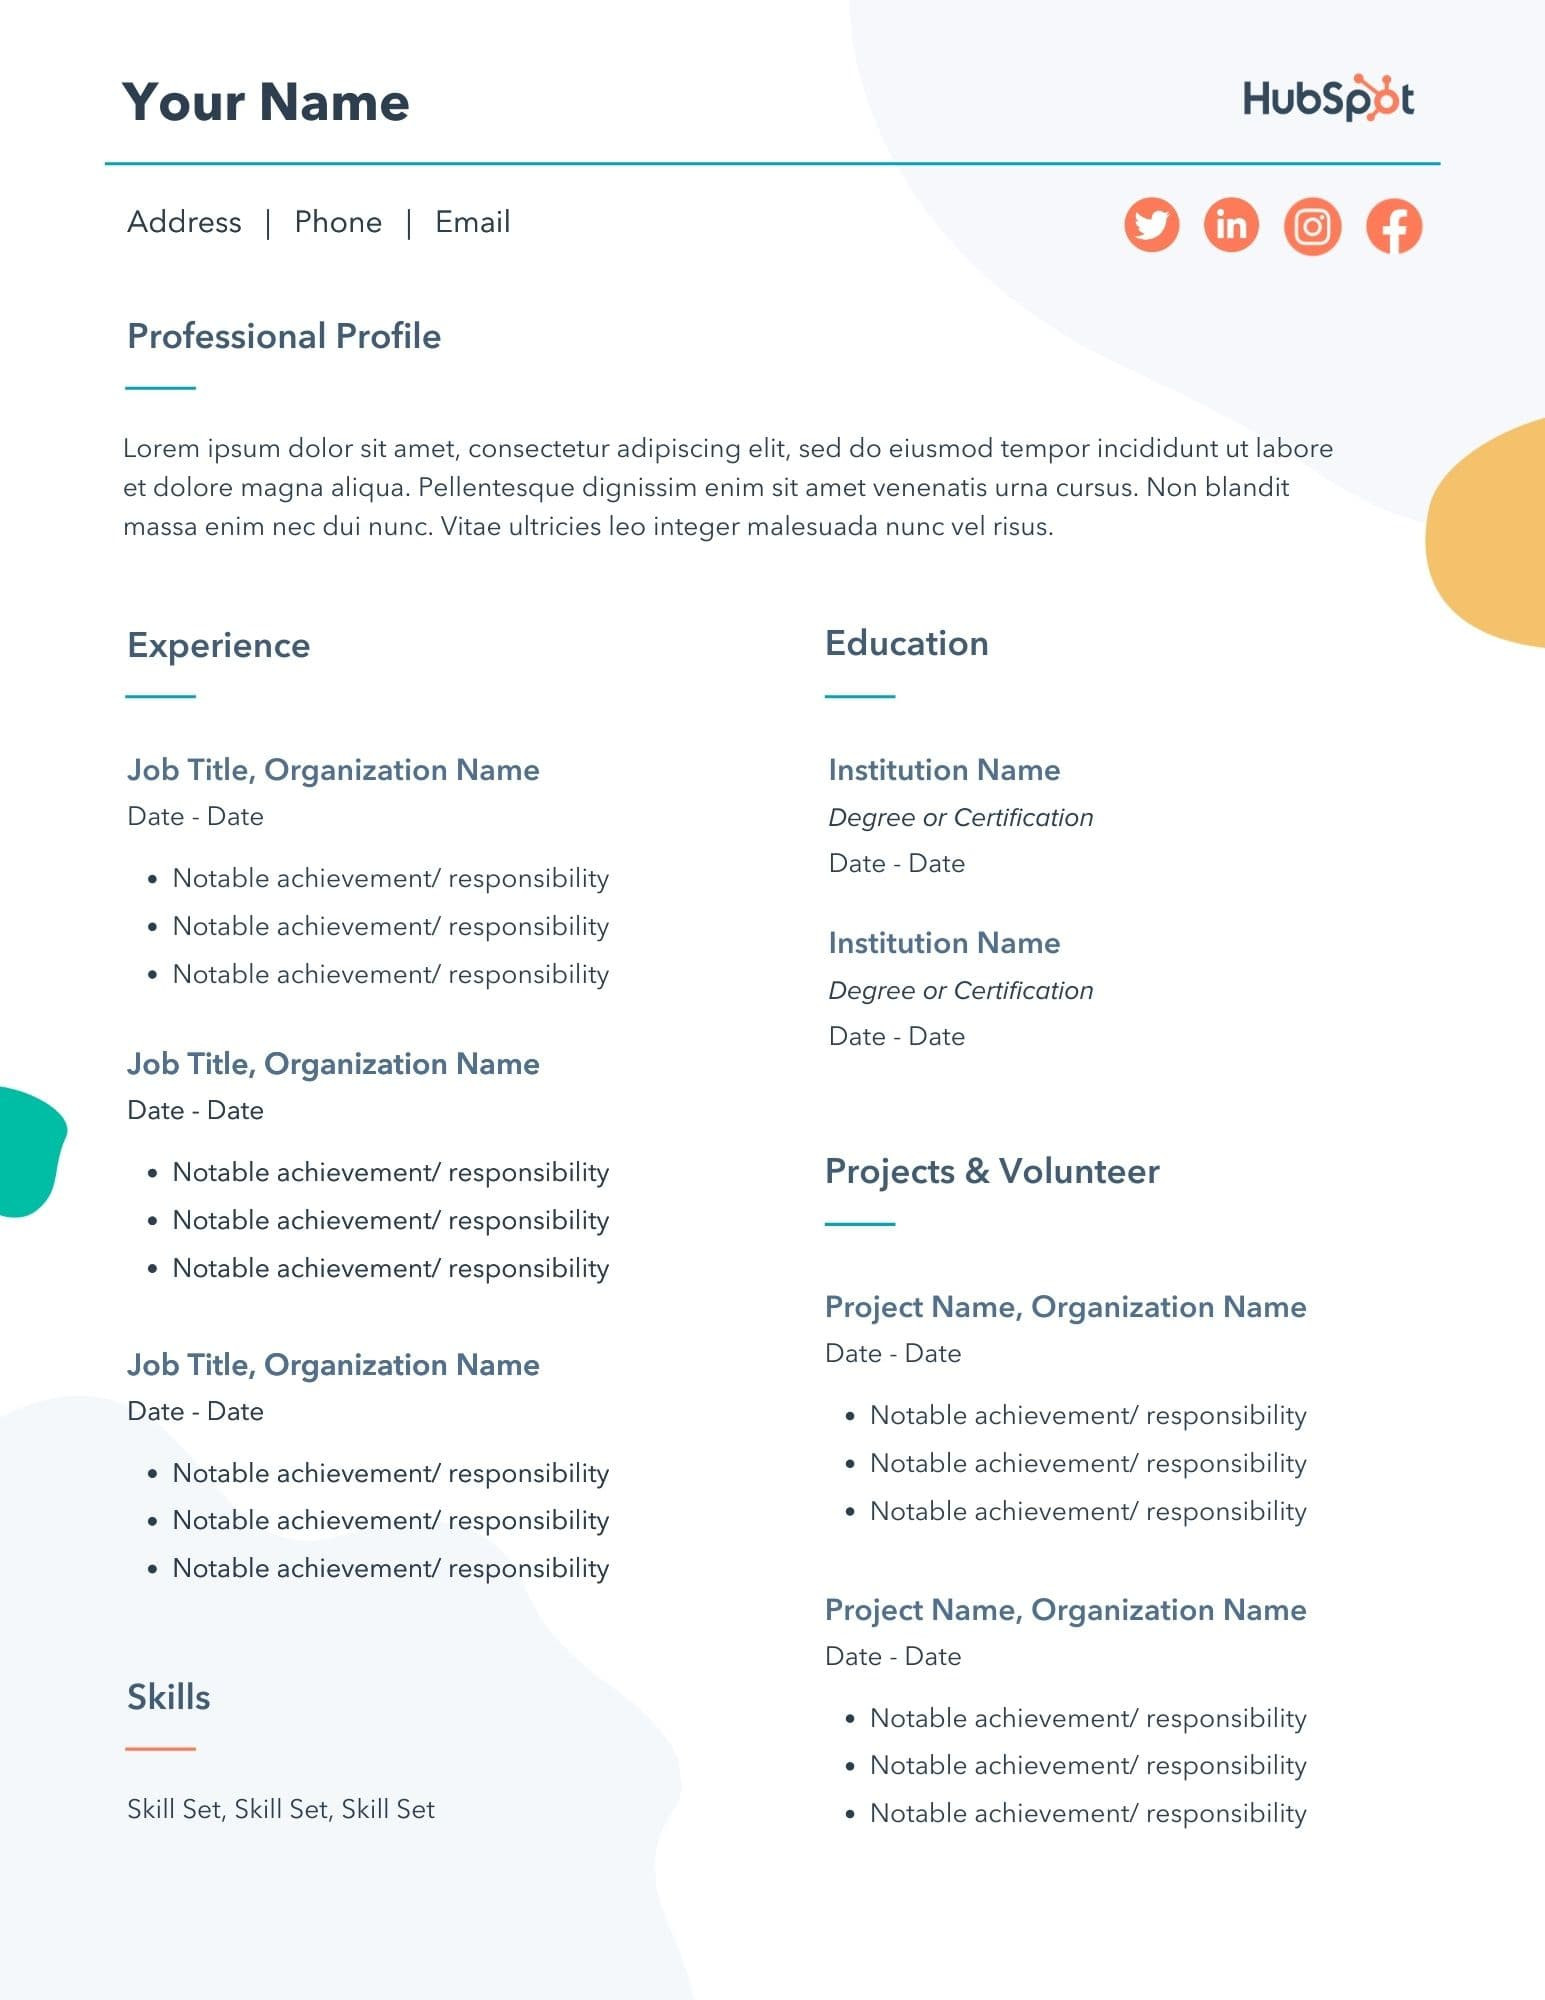 Best Place to Get Resume Templates 29 Free Resume Templates for Microsoft Word (& How to Make Your Own)